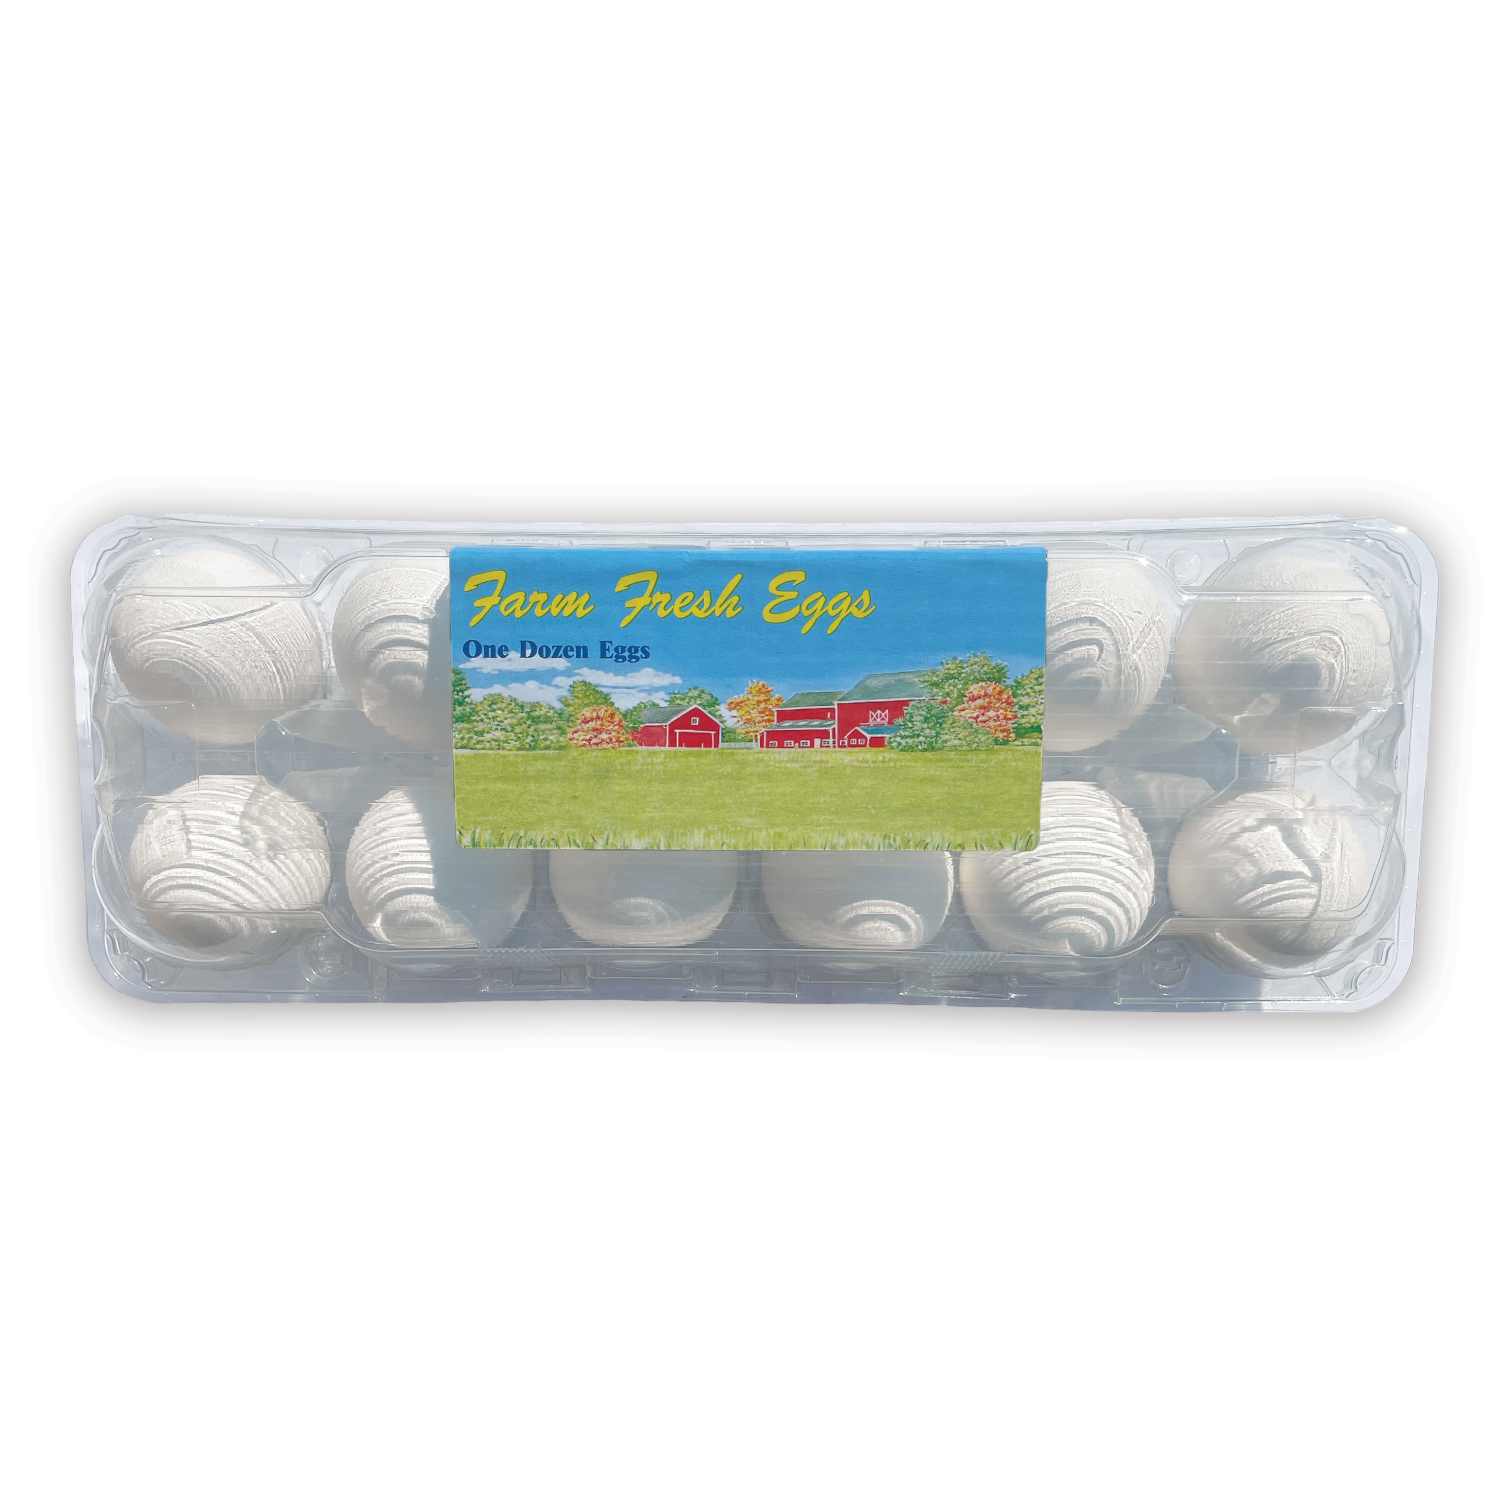 My Favorite Chicken 10 Pack Plastic Egg Flat Carton Tray Holds 30 Eggs Reusable Washable